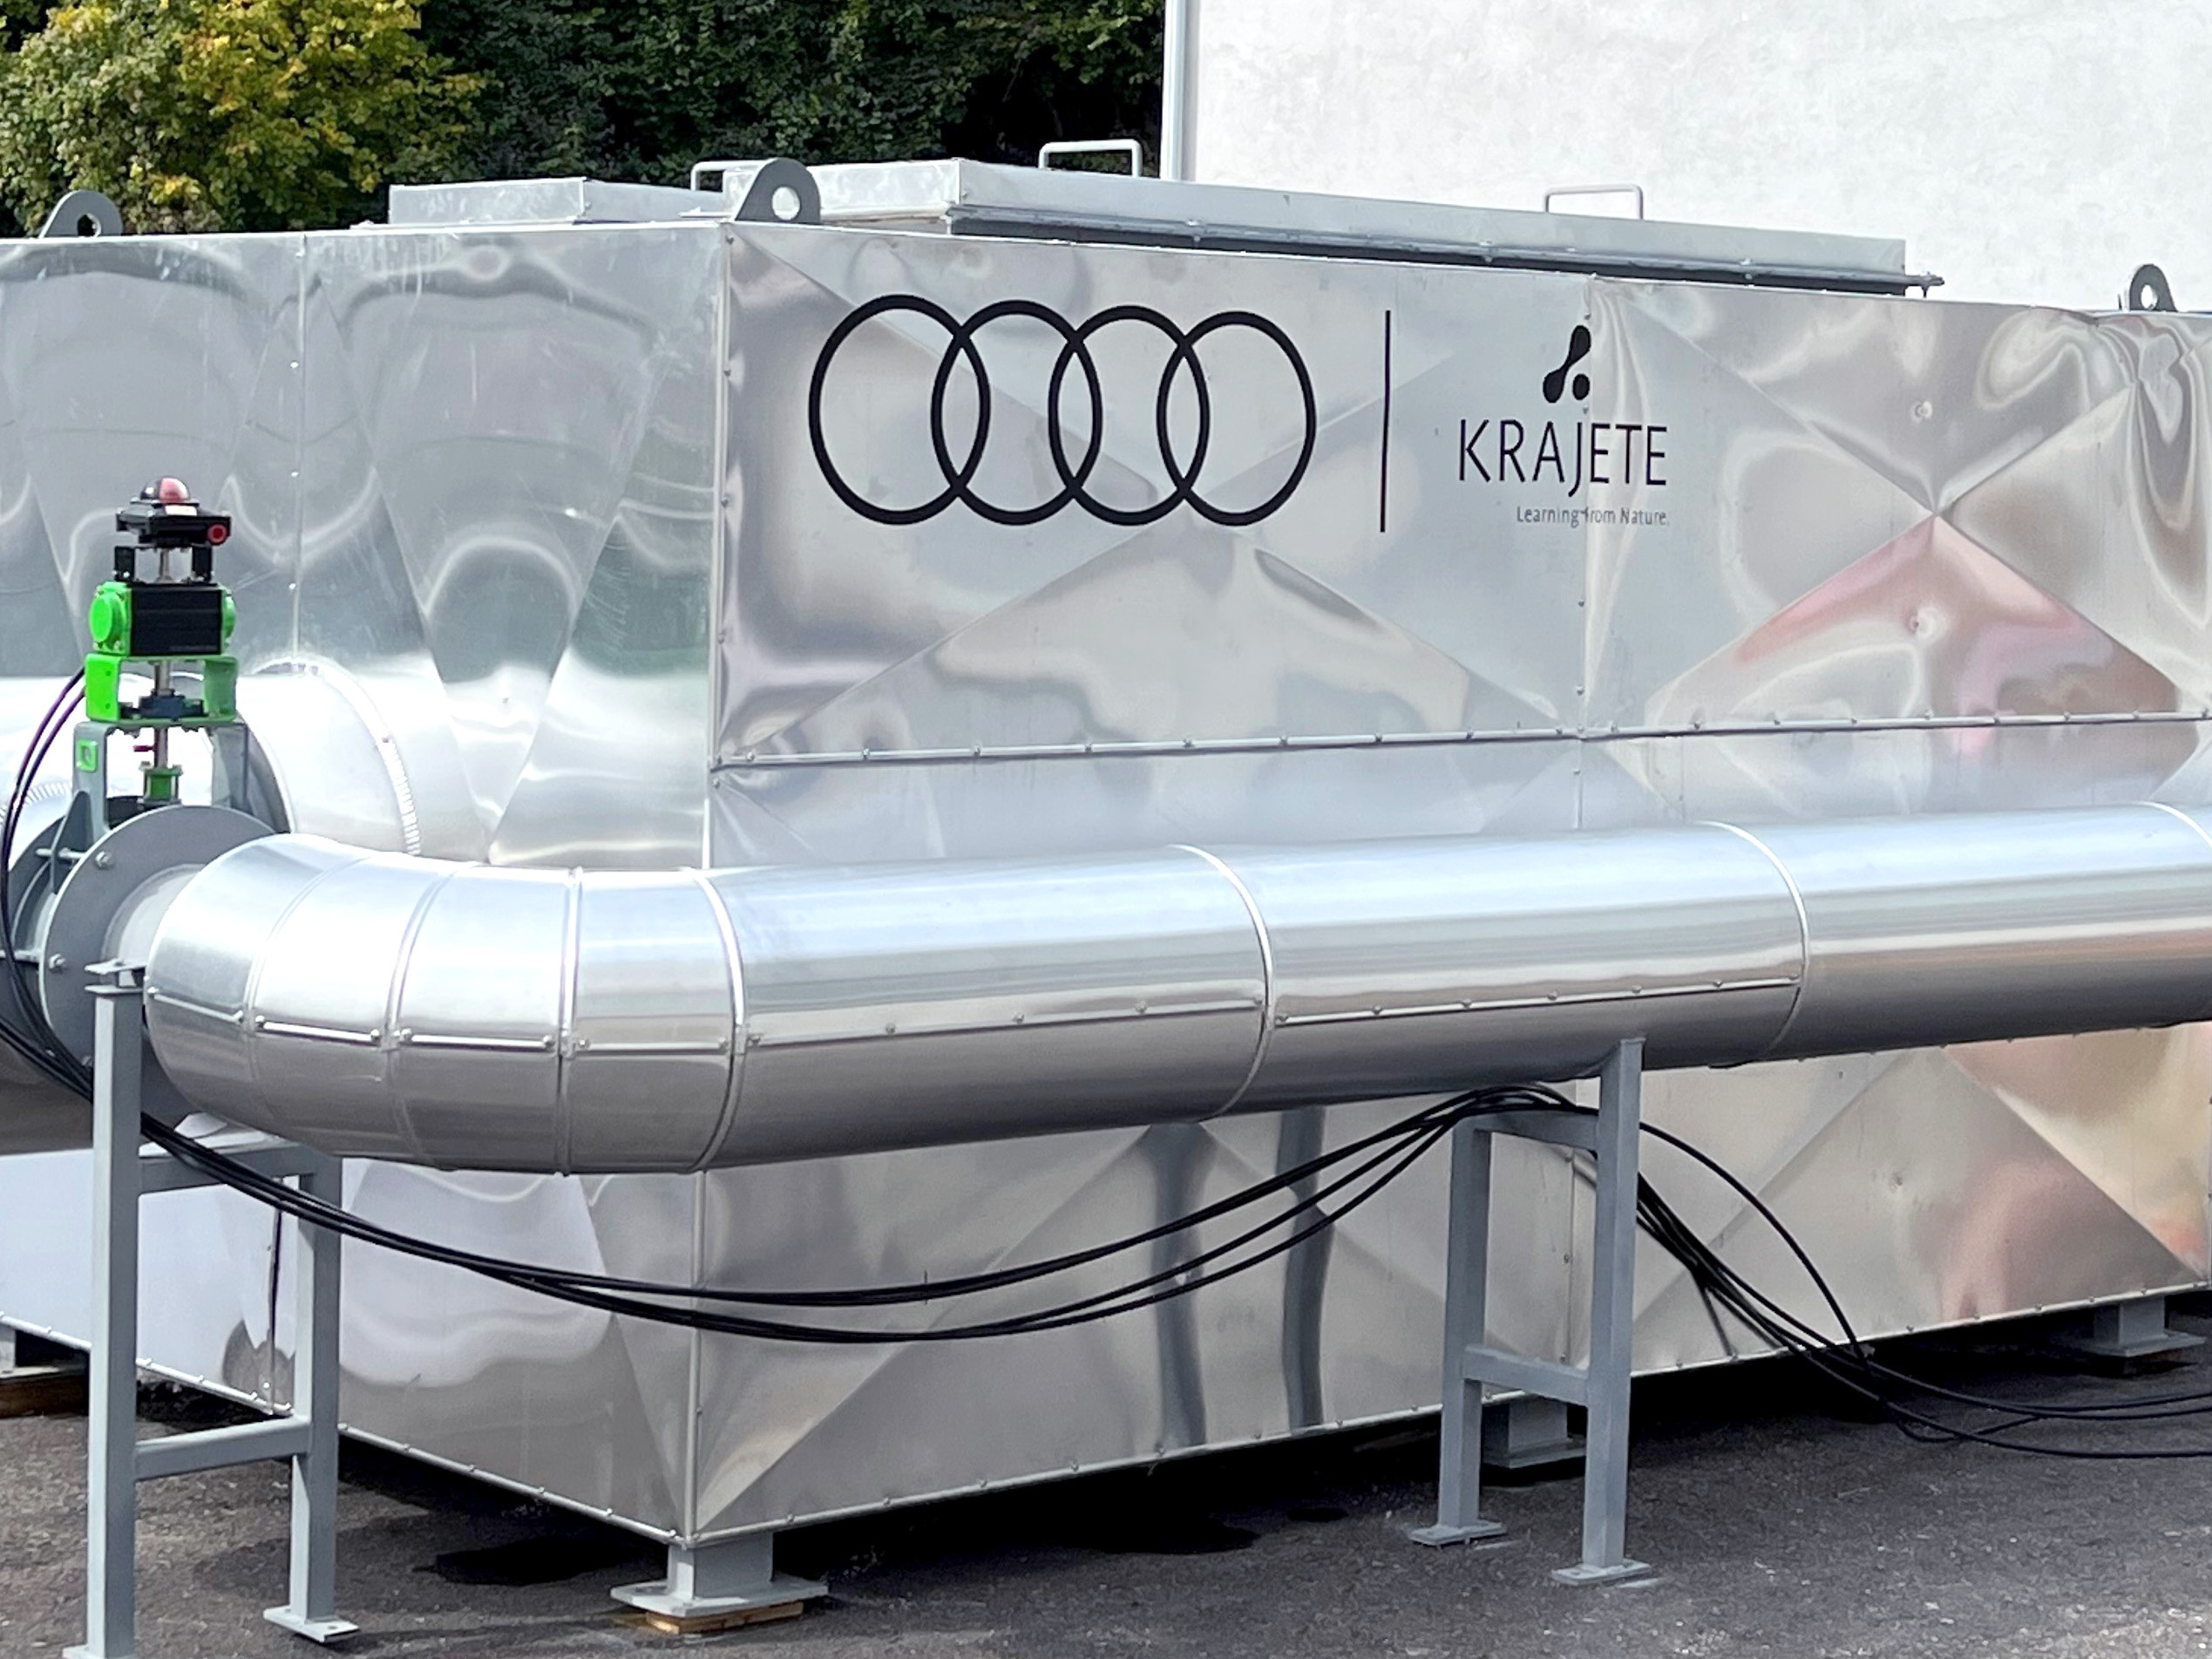 Audi filters carbon dioxide from the air